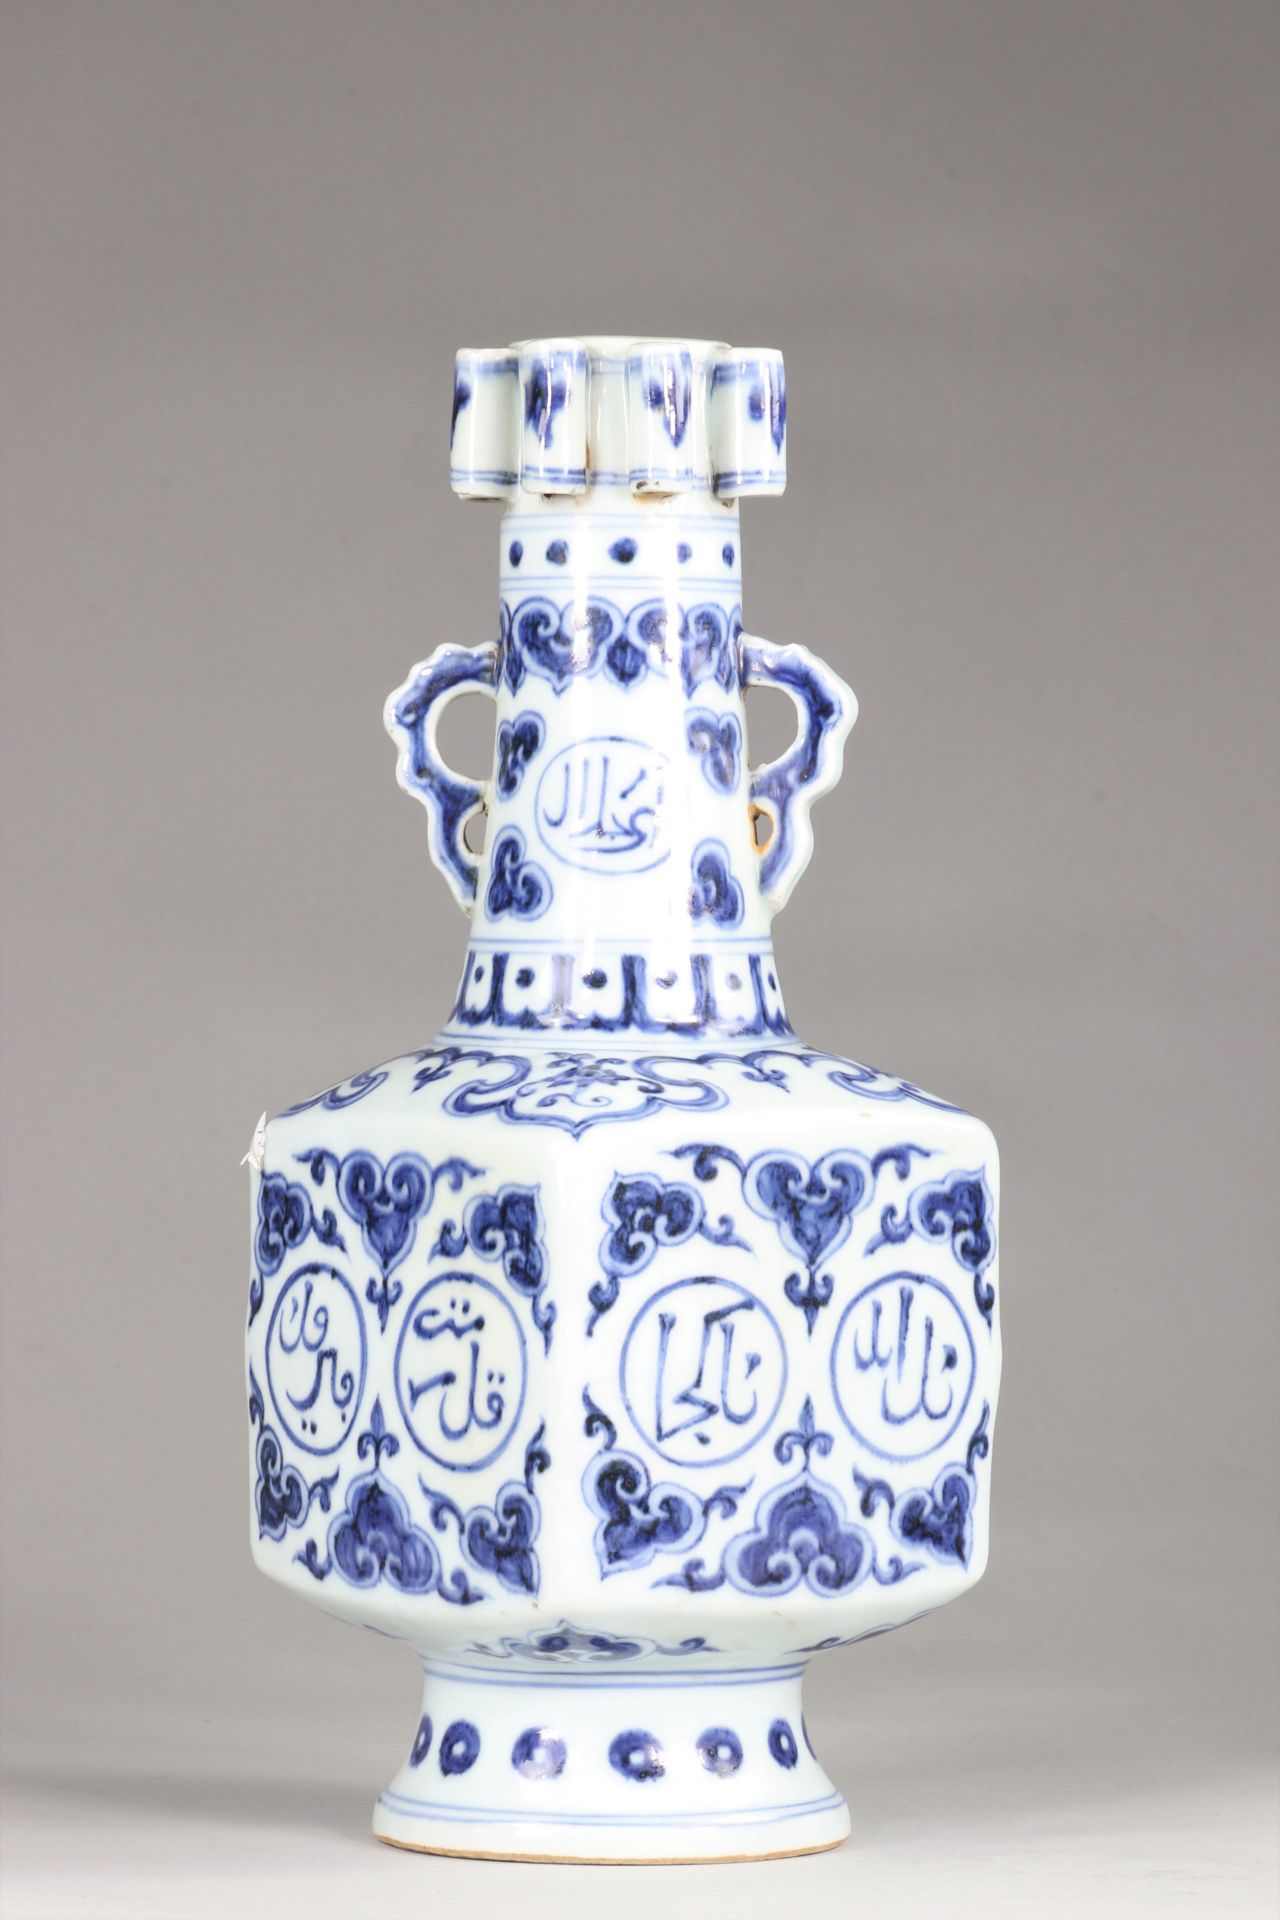 China faceted Ming vase, mark of Xuande, with Quranic quotes in cobalt blue